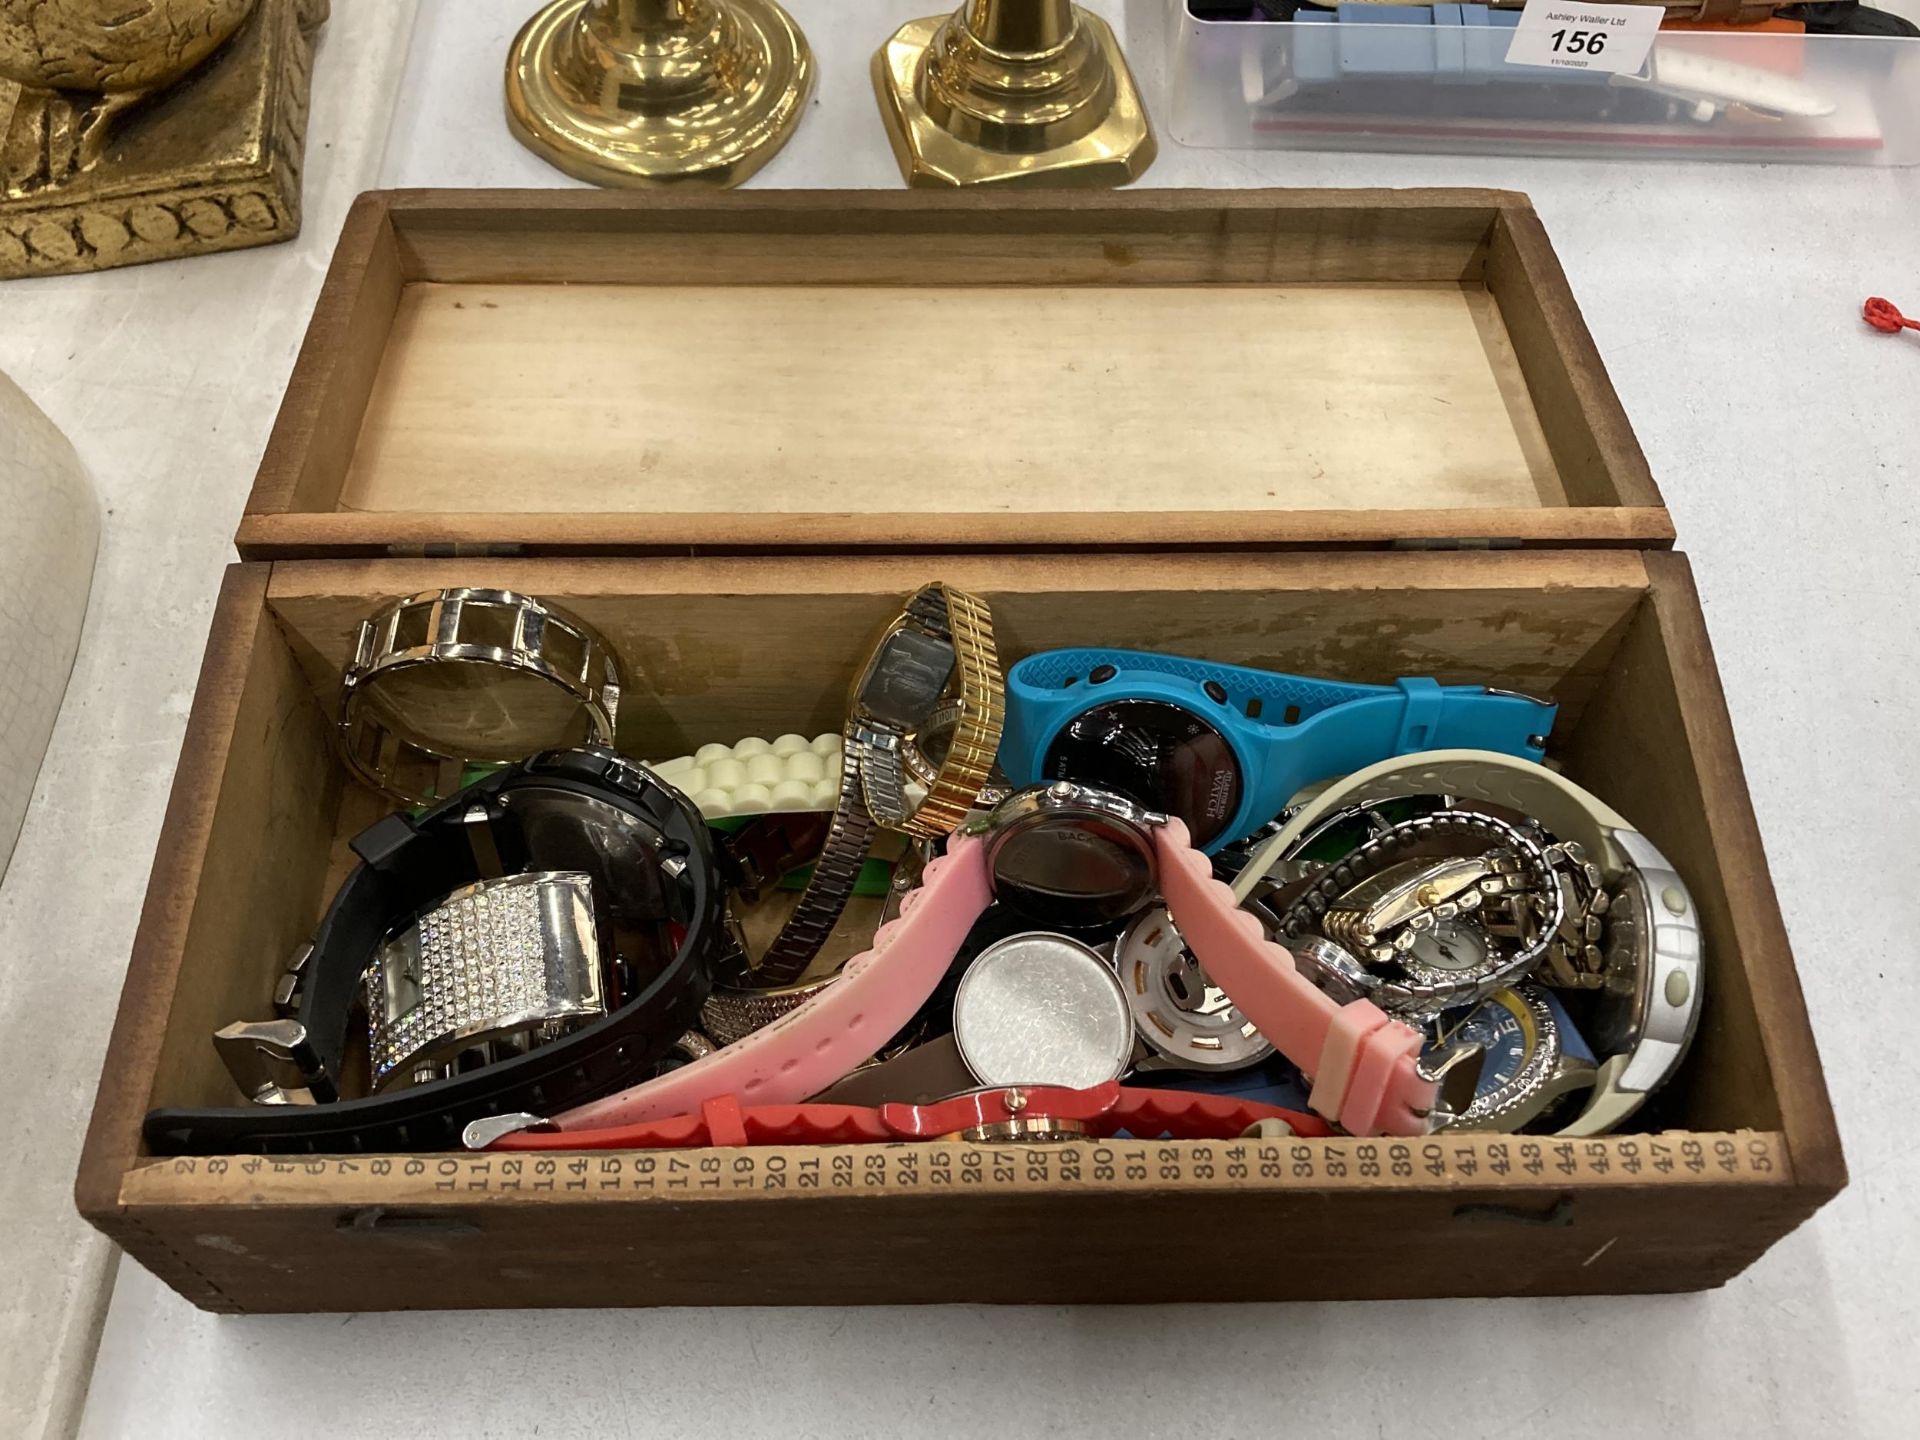 A VINTAGE WOODEN BOX CONTAINING A QUANTITY OF WRISTWATCHES TO INCLUDE LIMIT, SEKONDA, ETC